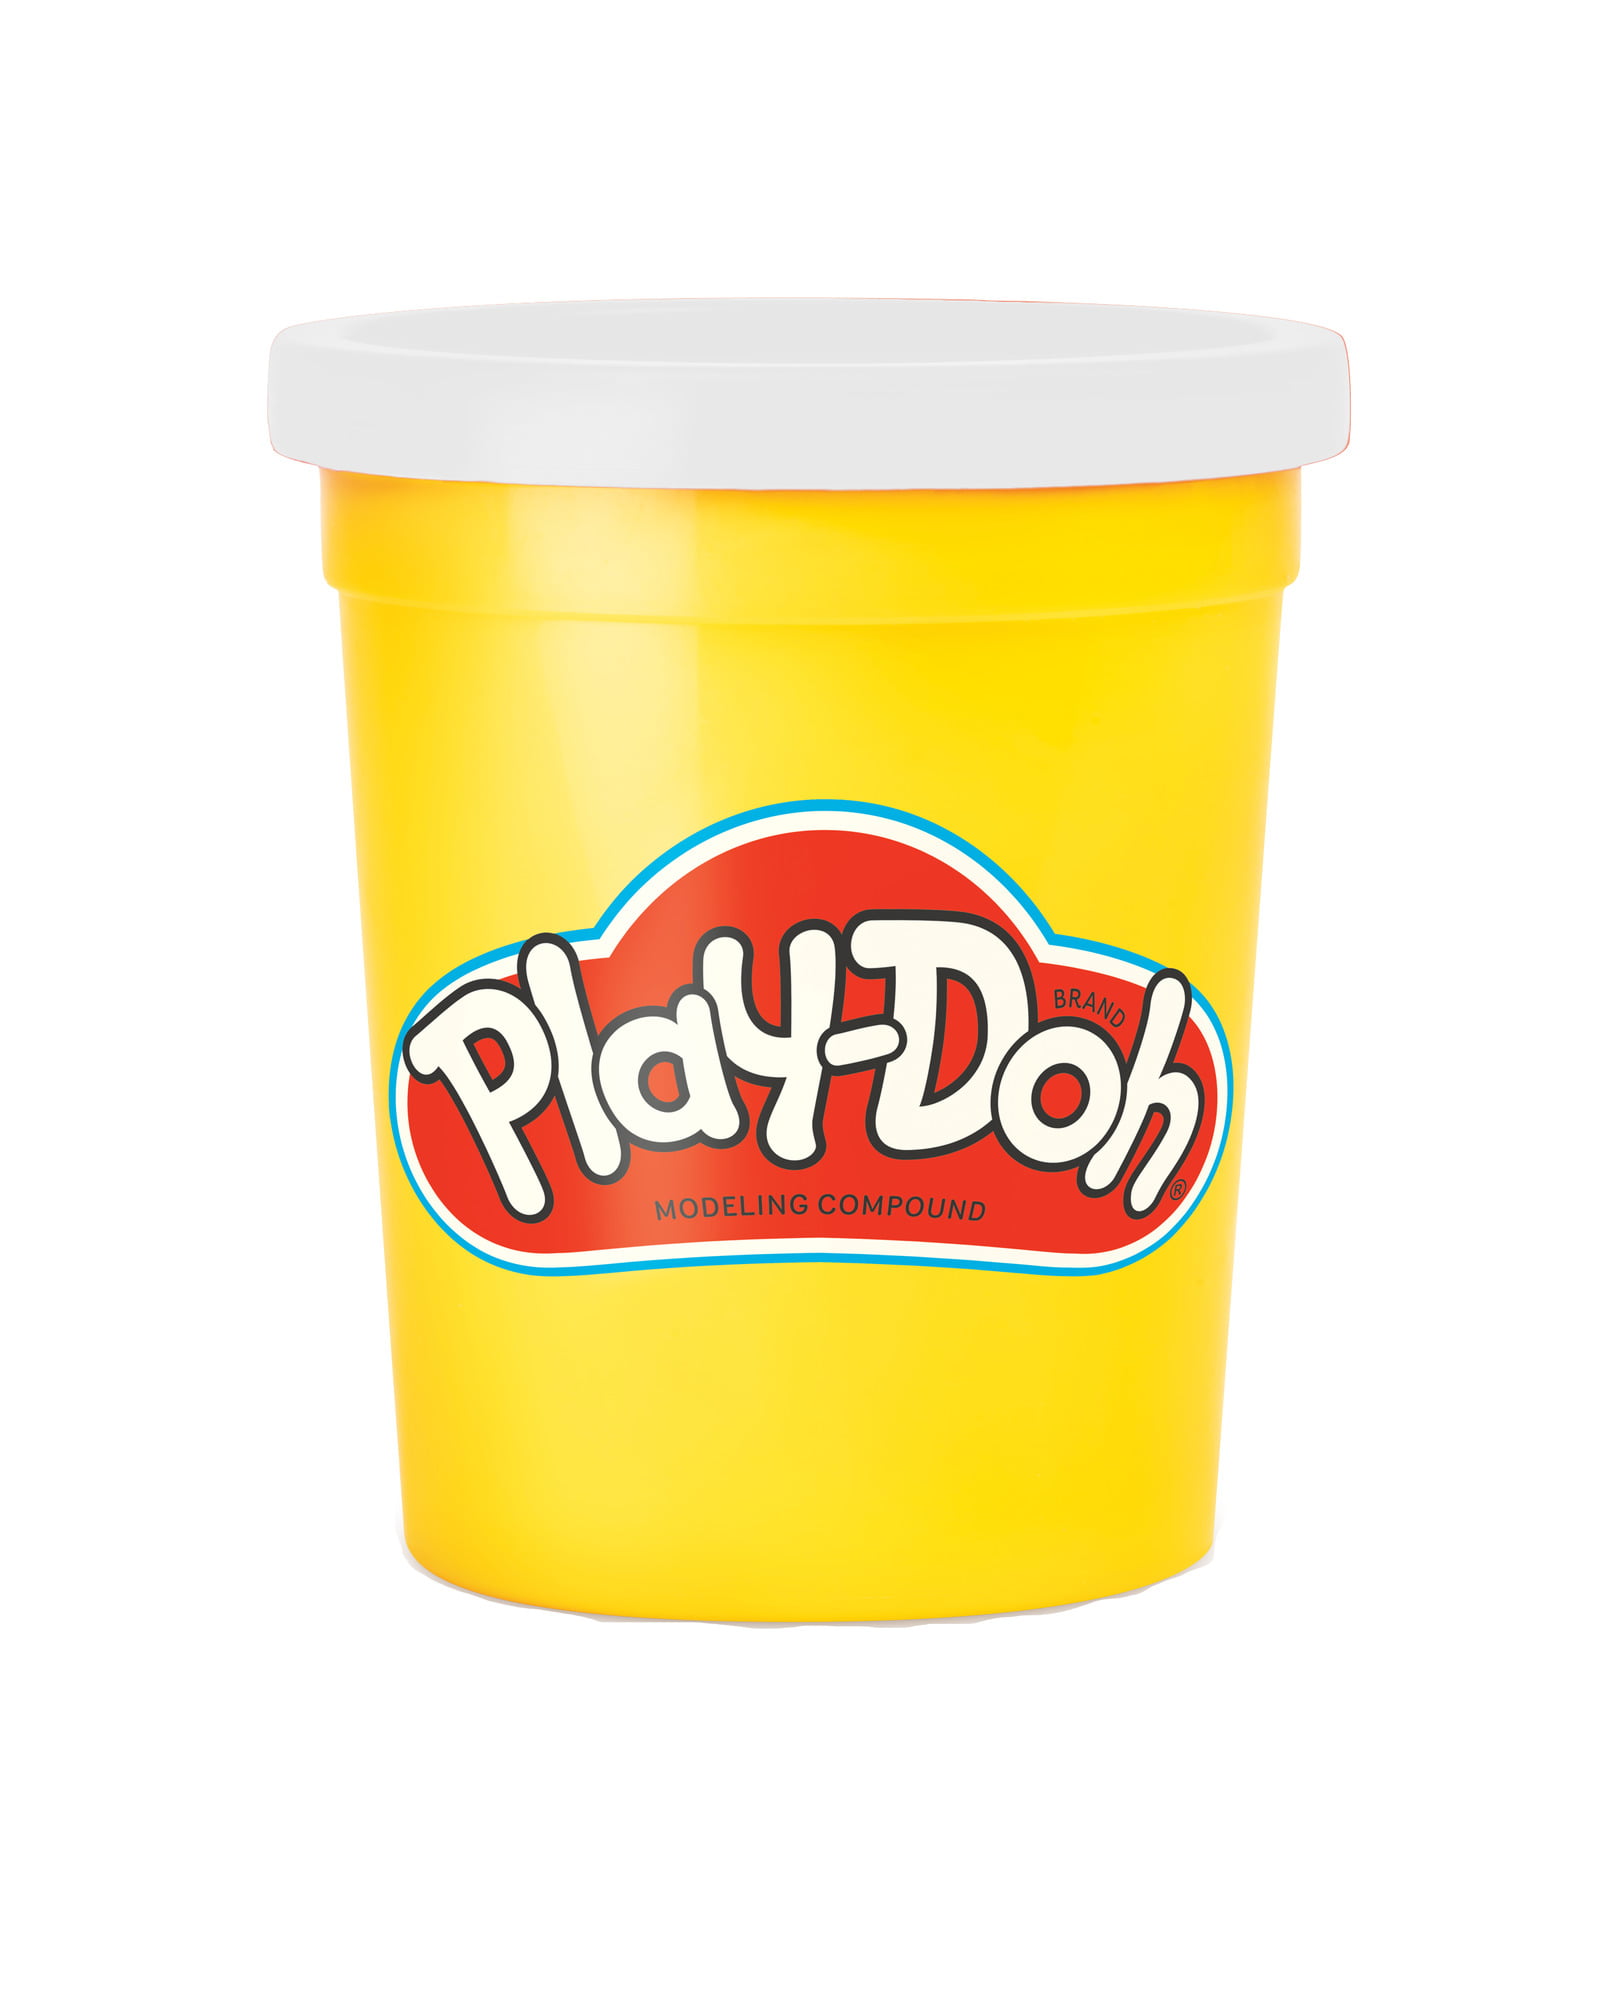 Generic Play-Doh- WHITE (23845) 2 Pack - Play-Doh- WHITE (23845) 2